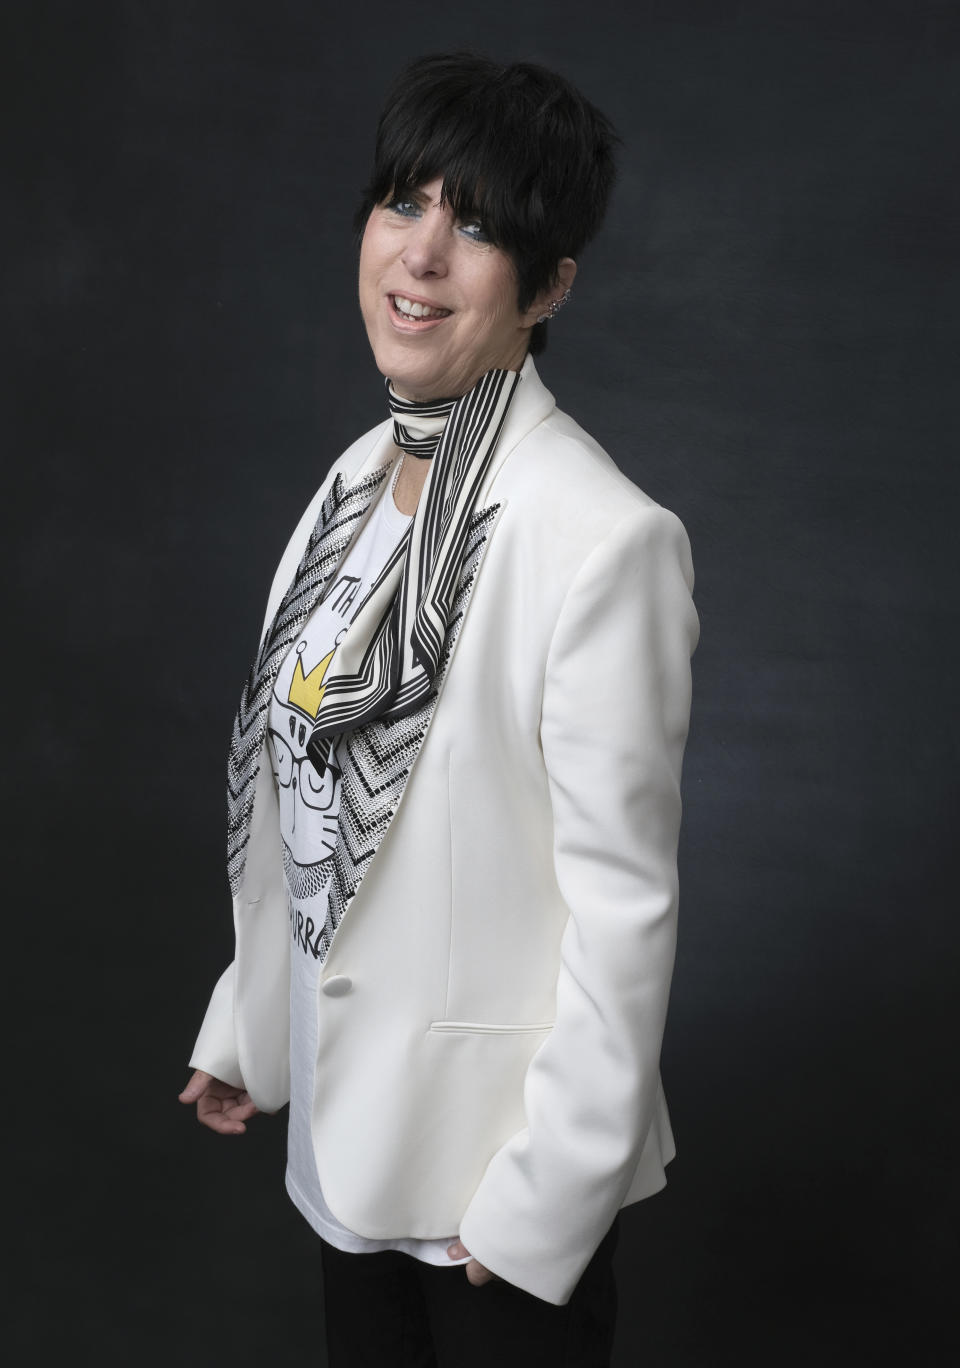 FILE - Diane Warren poses for a portrait at the 91st Academy Awards Nominees Luncheon at The Beverly Hilton Hotel on Monday, Feb. 4, 2019, in Beverly Hills, Calif. Warren will receive an honorary Oscar at the annual Governors Awards. She’s the first songwriter to ever get the award. (Photo by Chris Pizzello/Invision/AP, File)